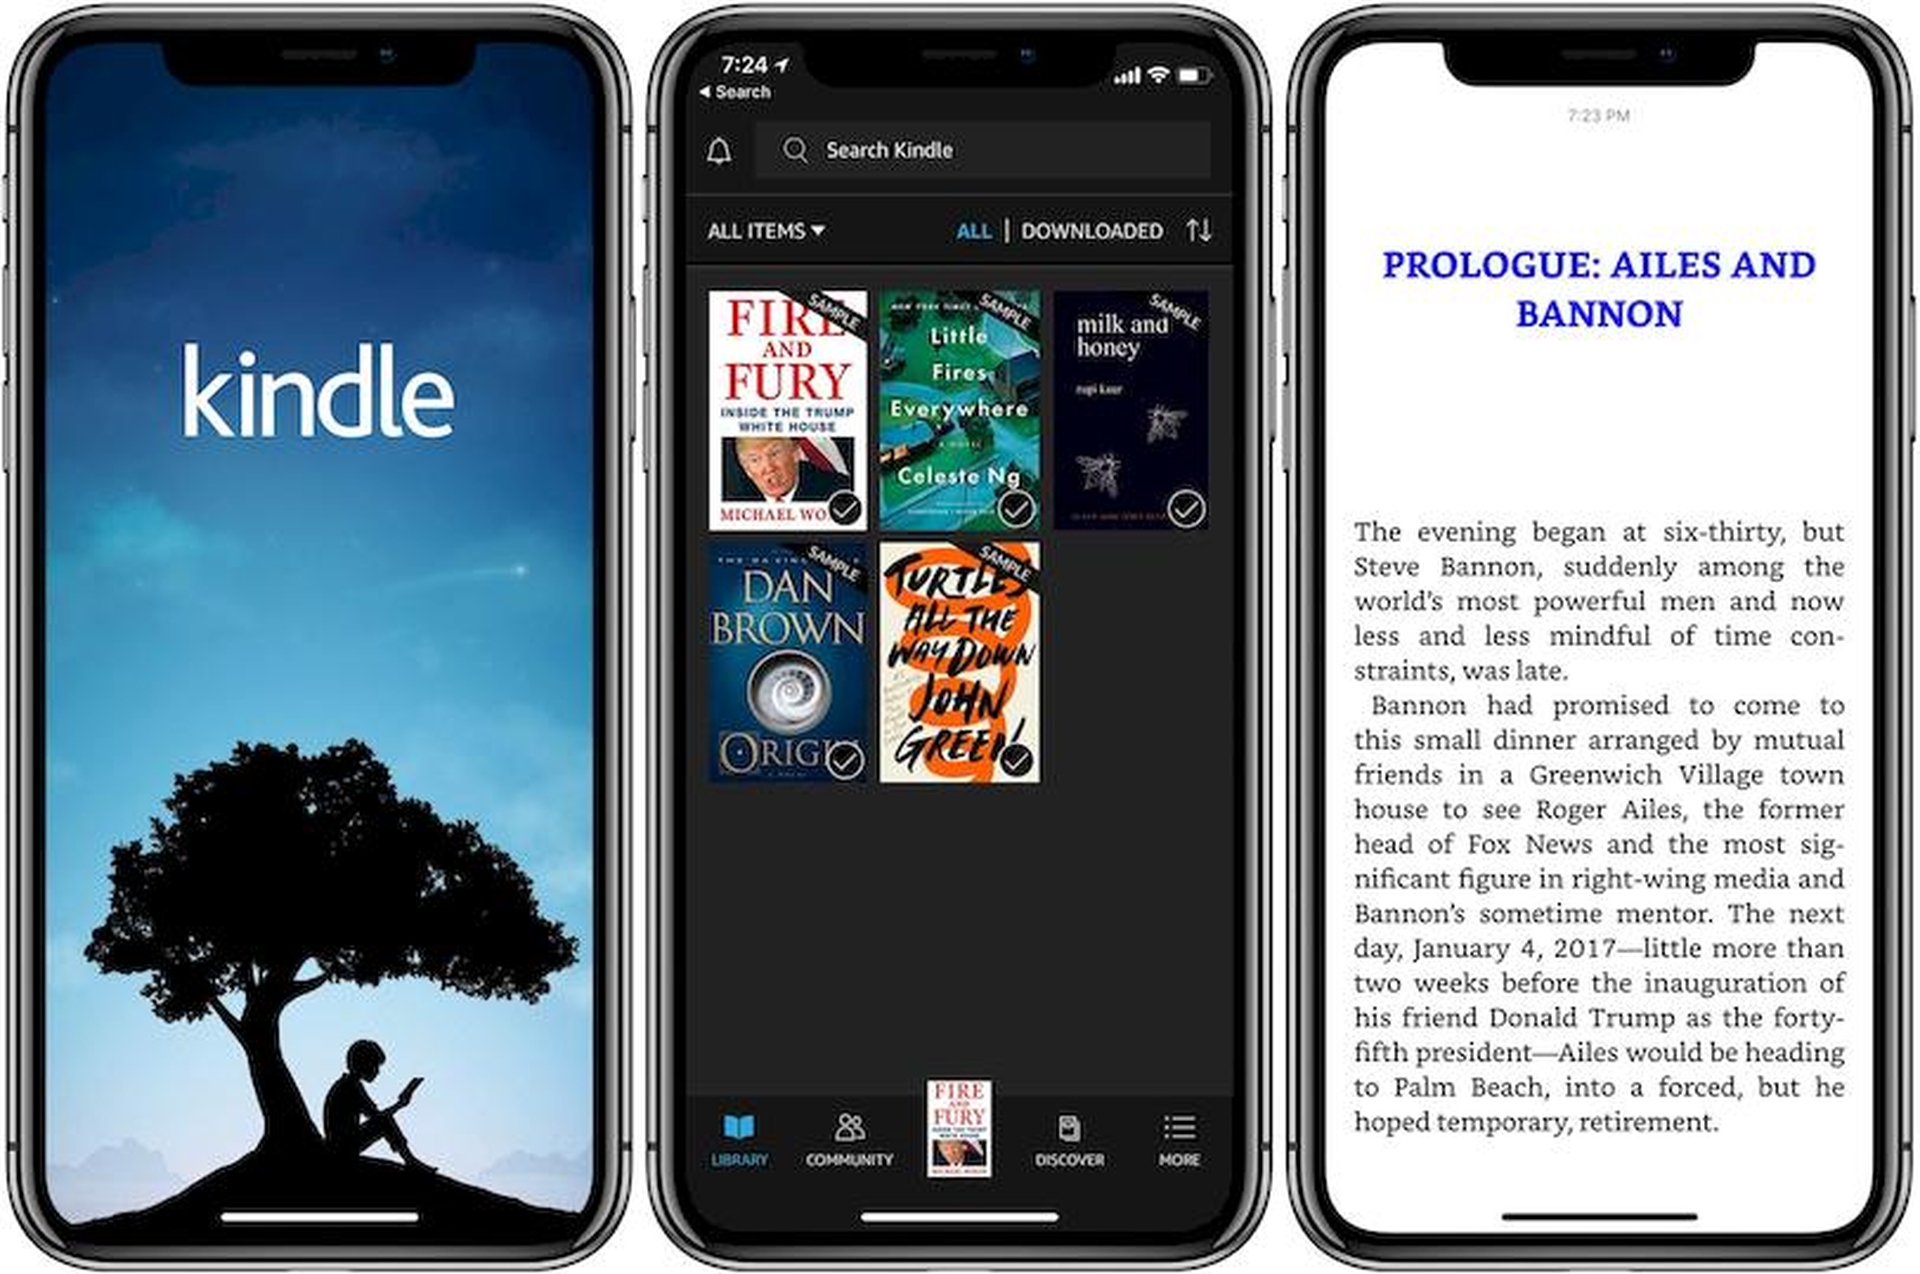 In this article, we are going to go over how to buy Kindle book on iPhone, so you can enjoy your favorite books where ever you go.